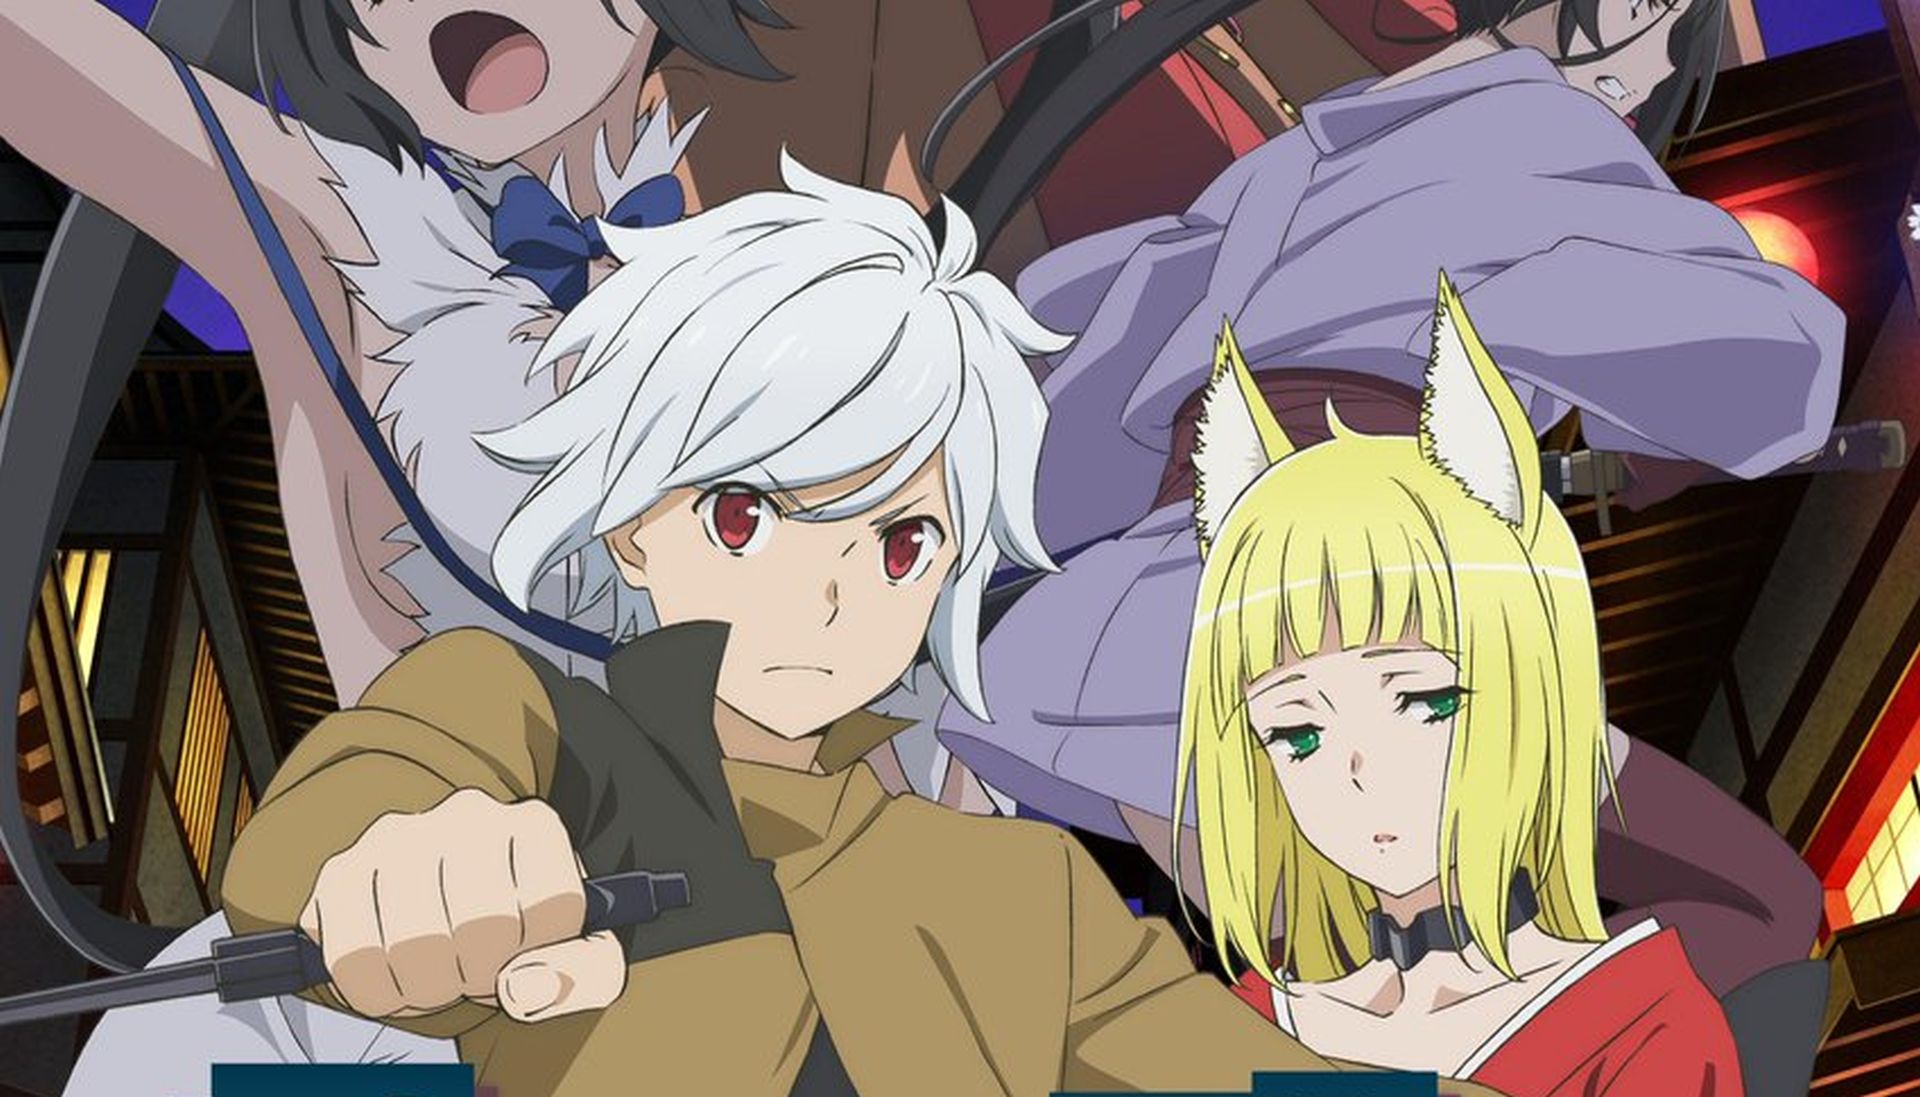 Is It Wrong to Try to Pick Up Girls in a Dungeon? Familia Myth